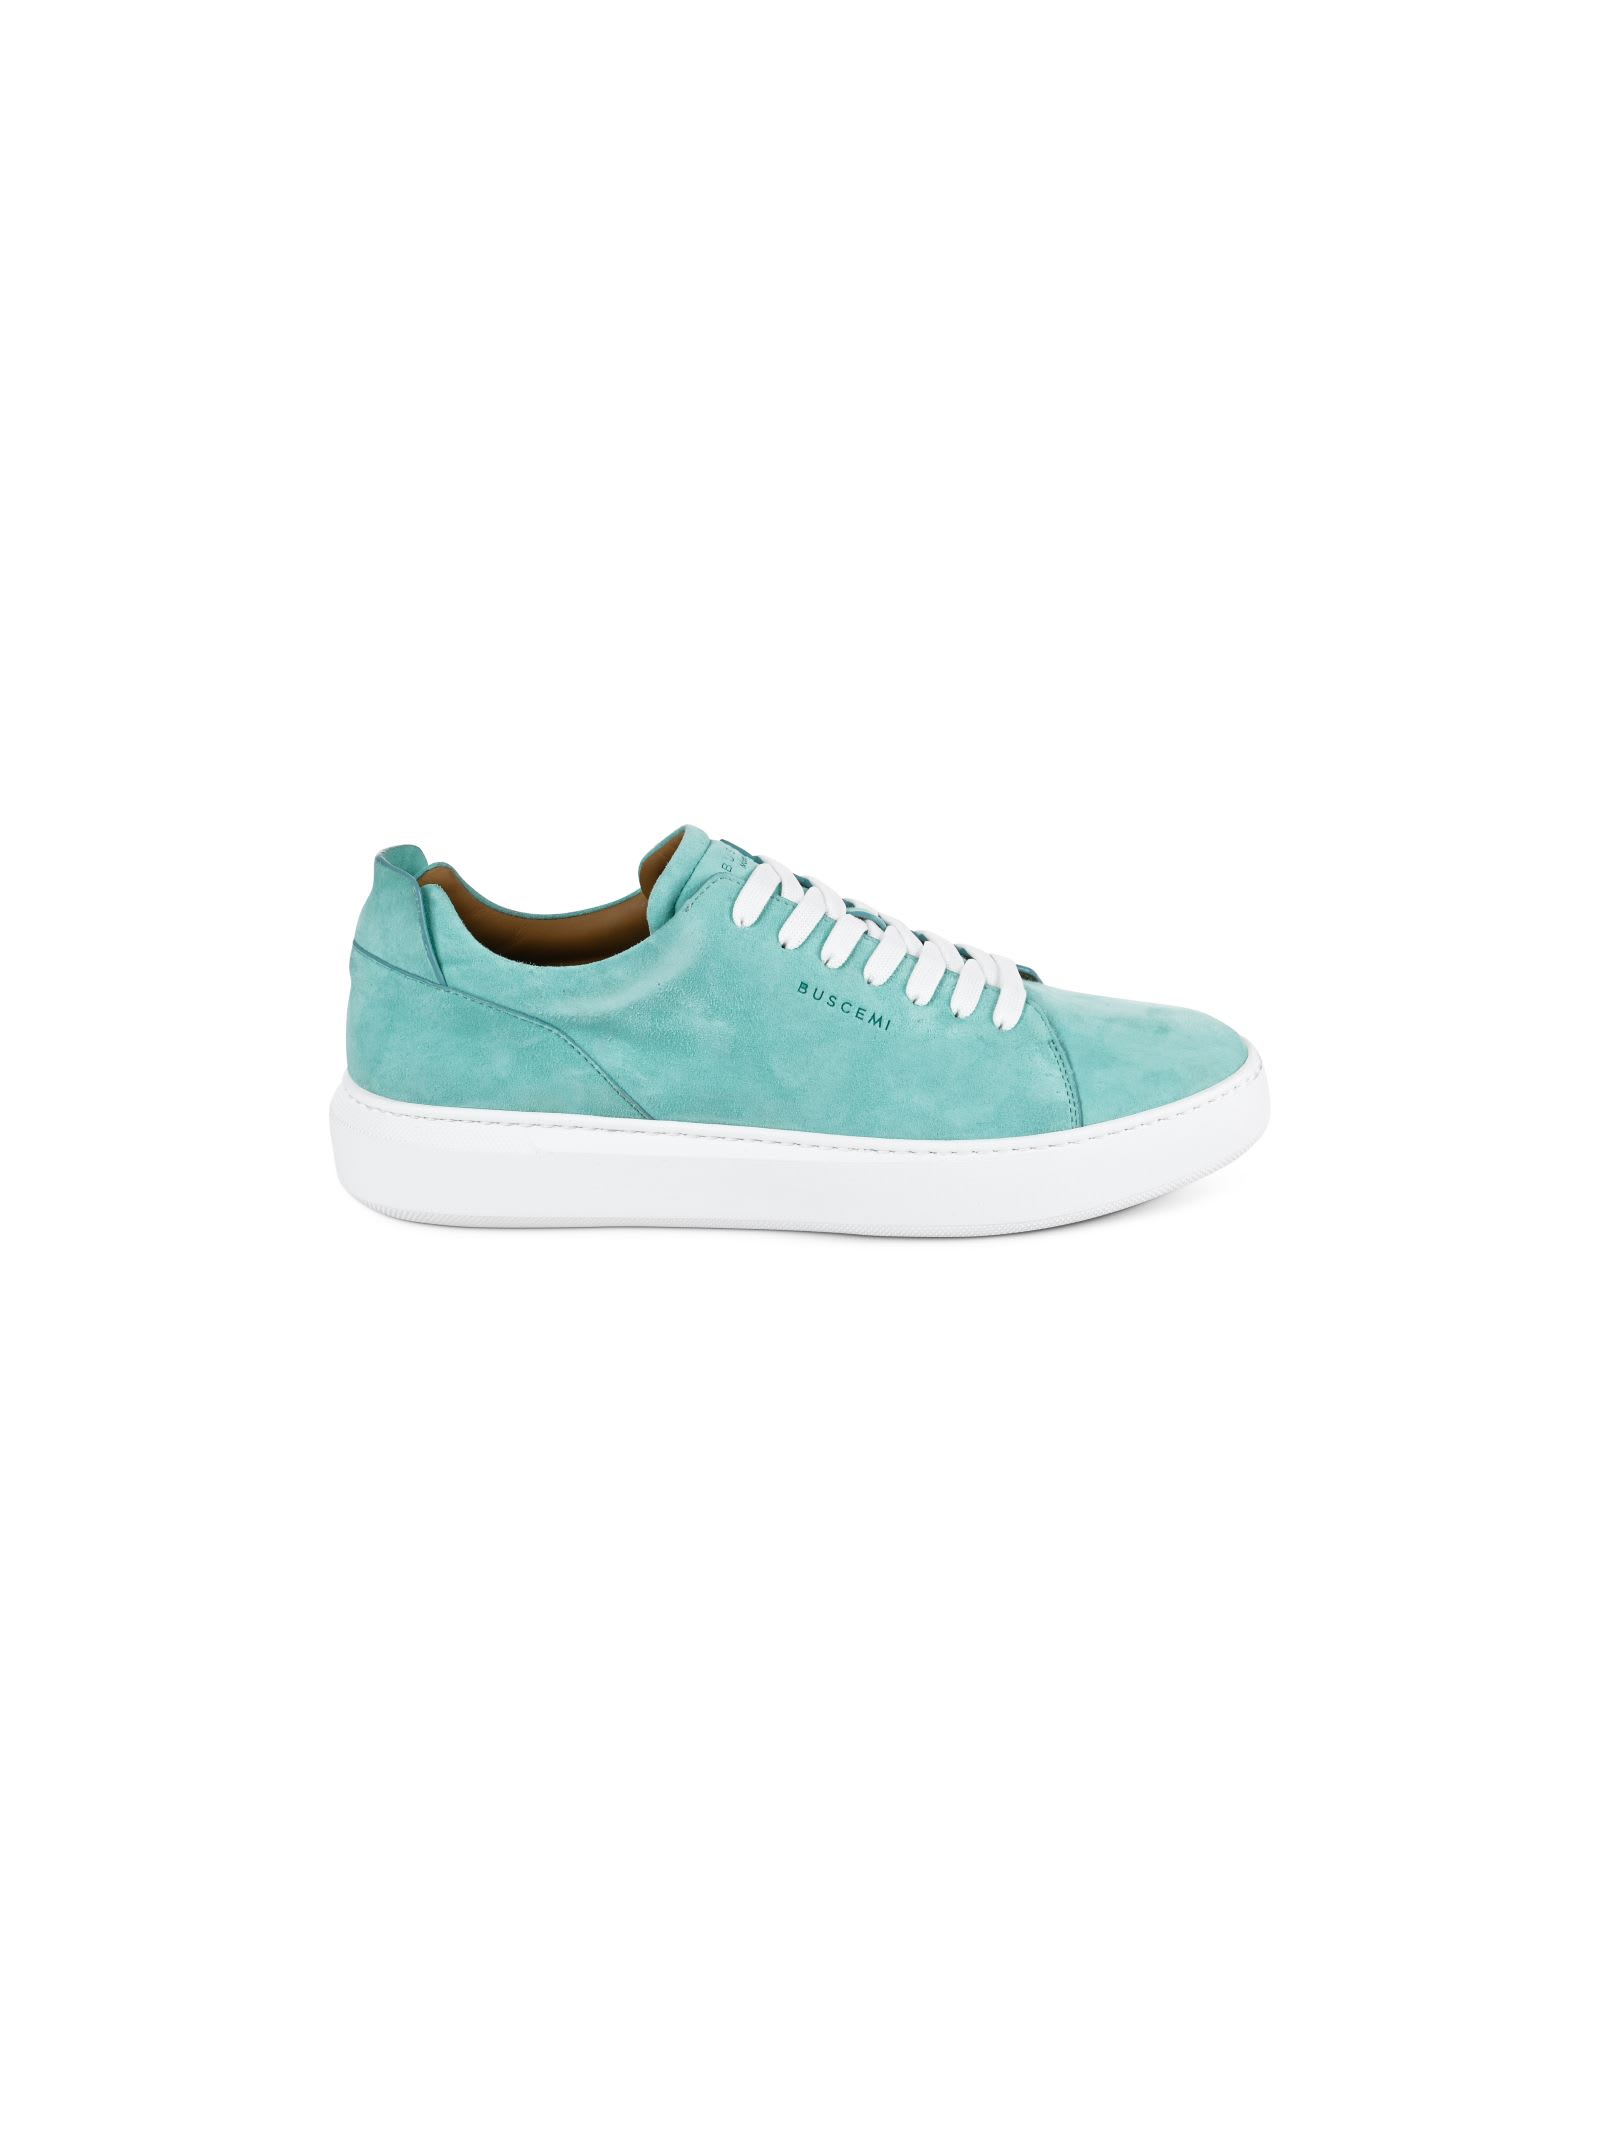 Buscemi Goat Leather Shoes Turquoise